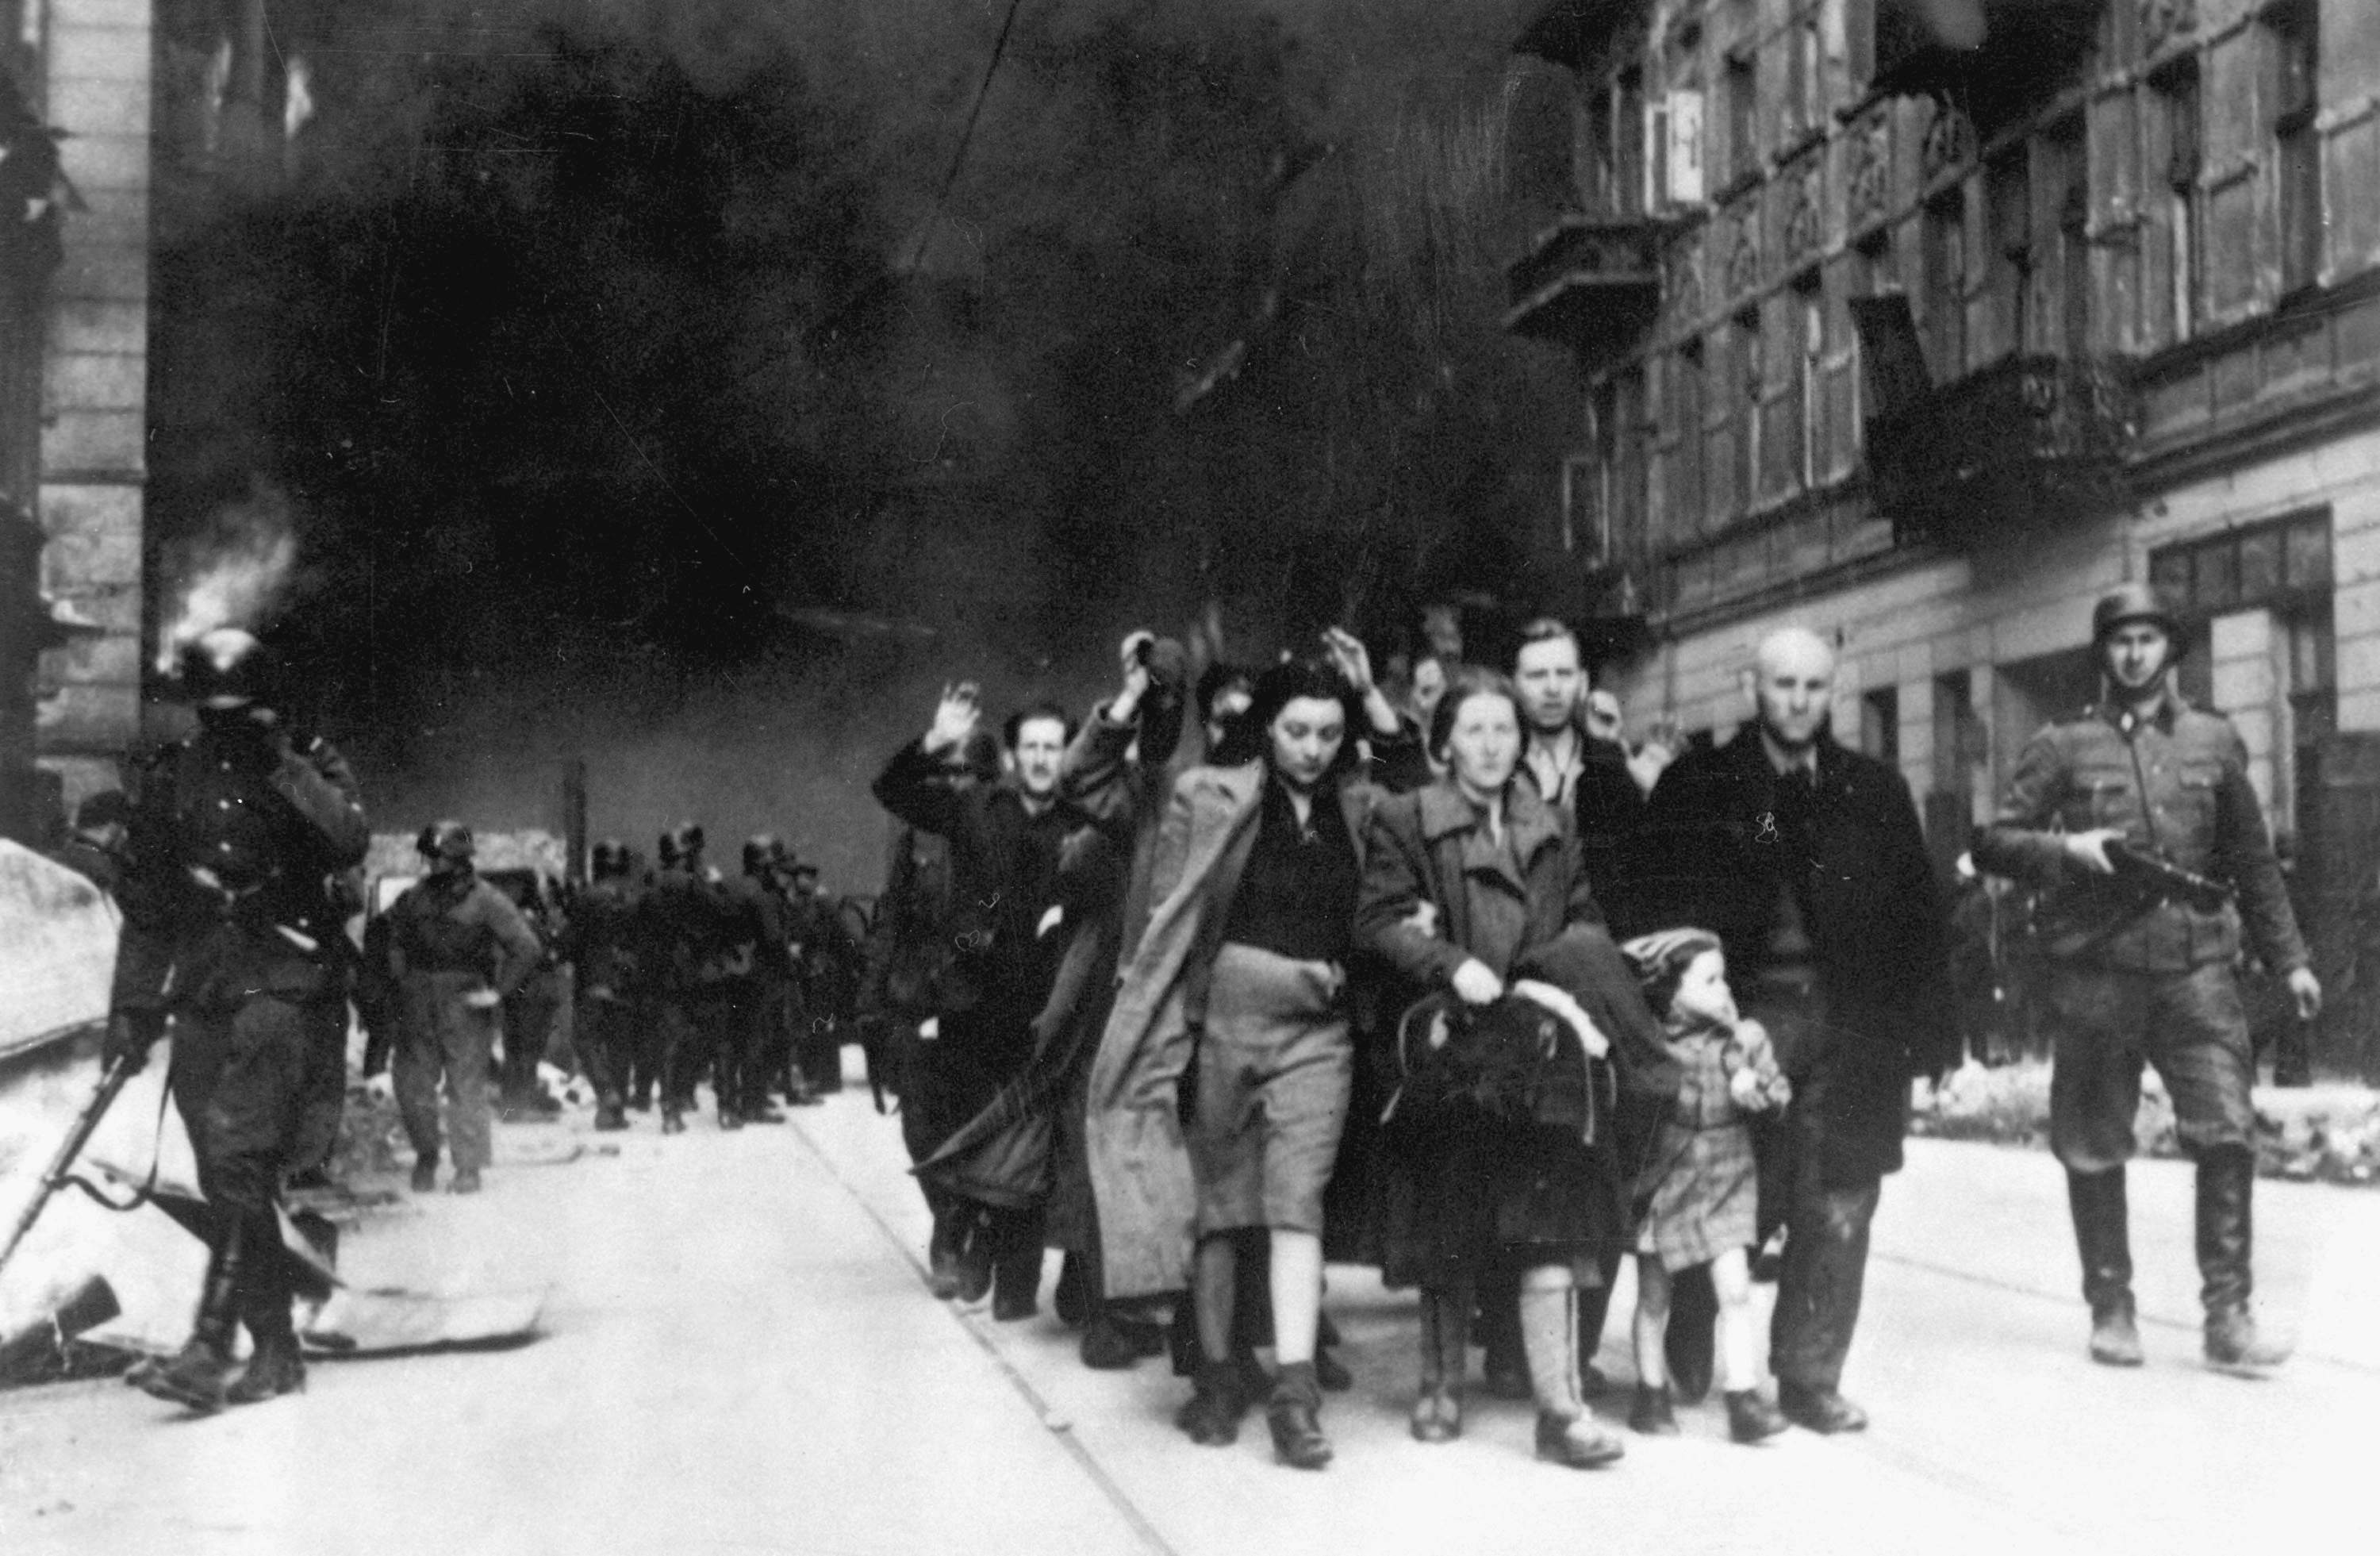 German troops lead captured Jewish residents of the Warsaw Ghetto to the assembly point for deportation, 1943.